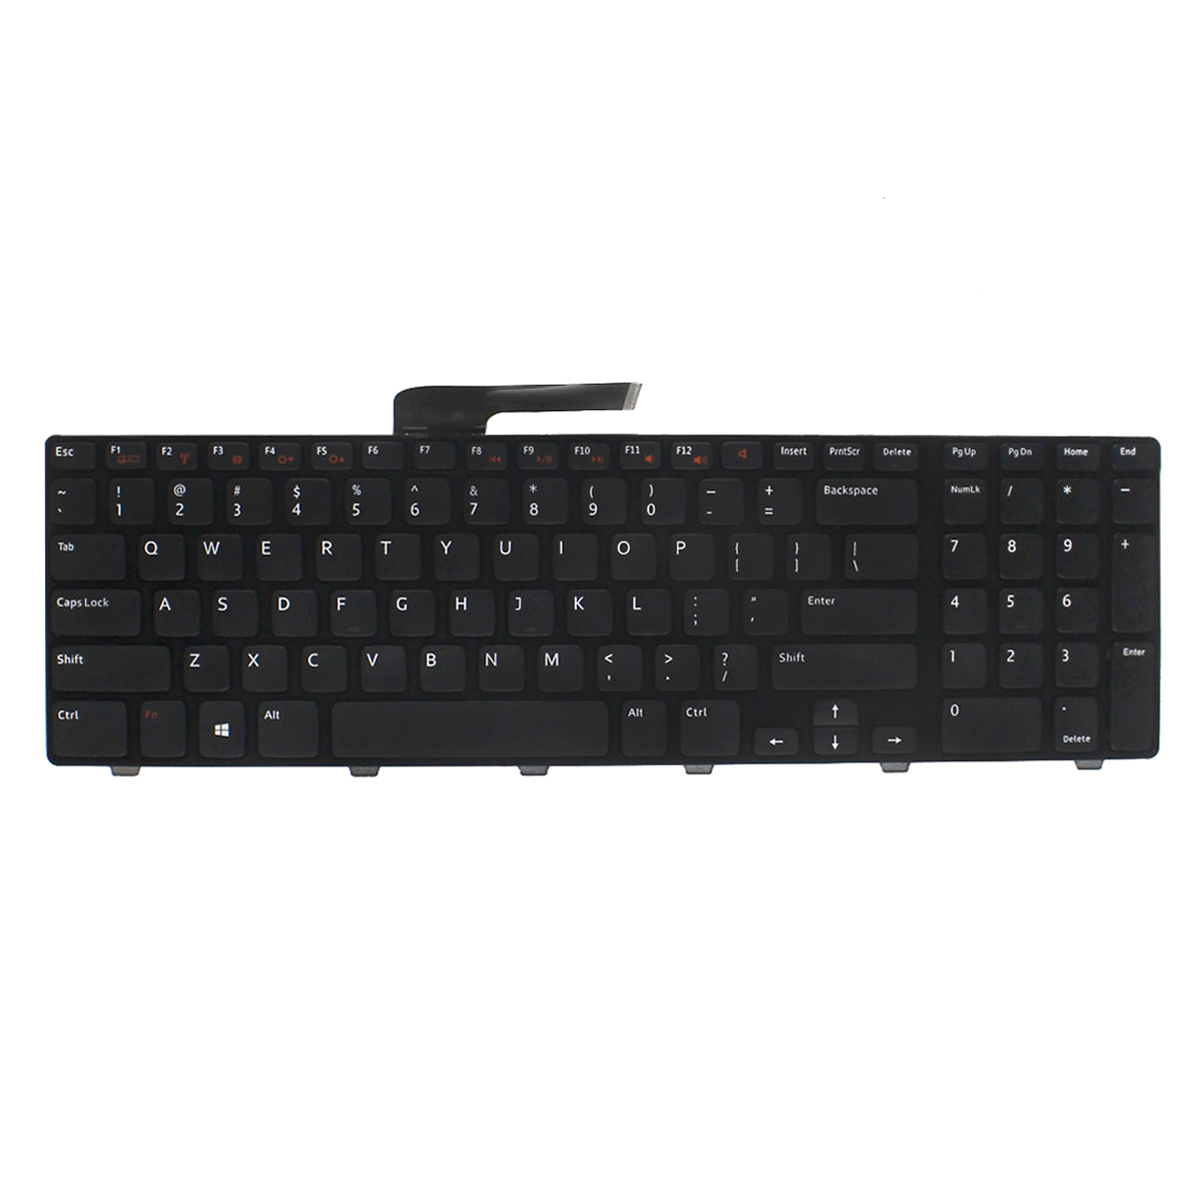 New original laptop keyboard for Dell Inspiron 17R N7110 5720 77 - Click Image to Close